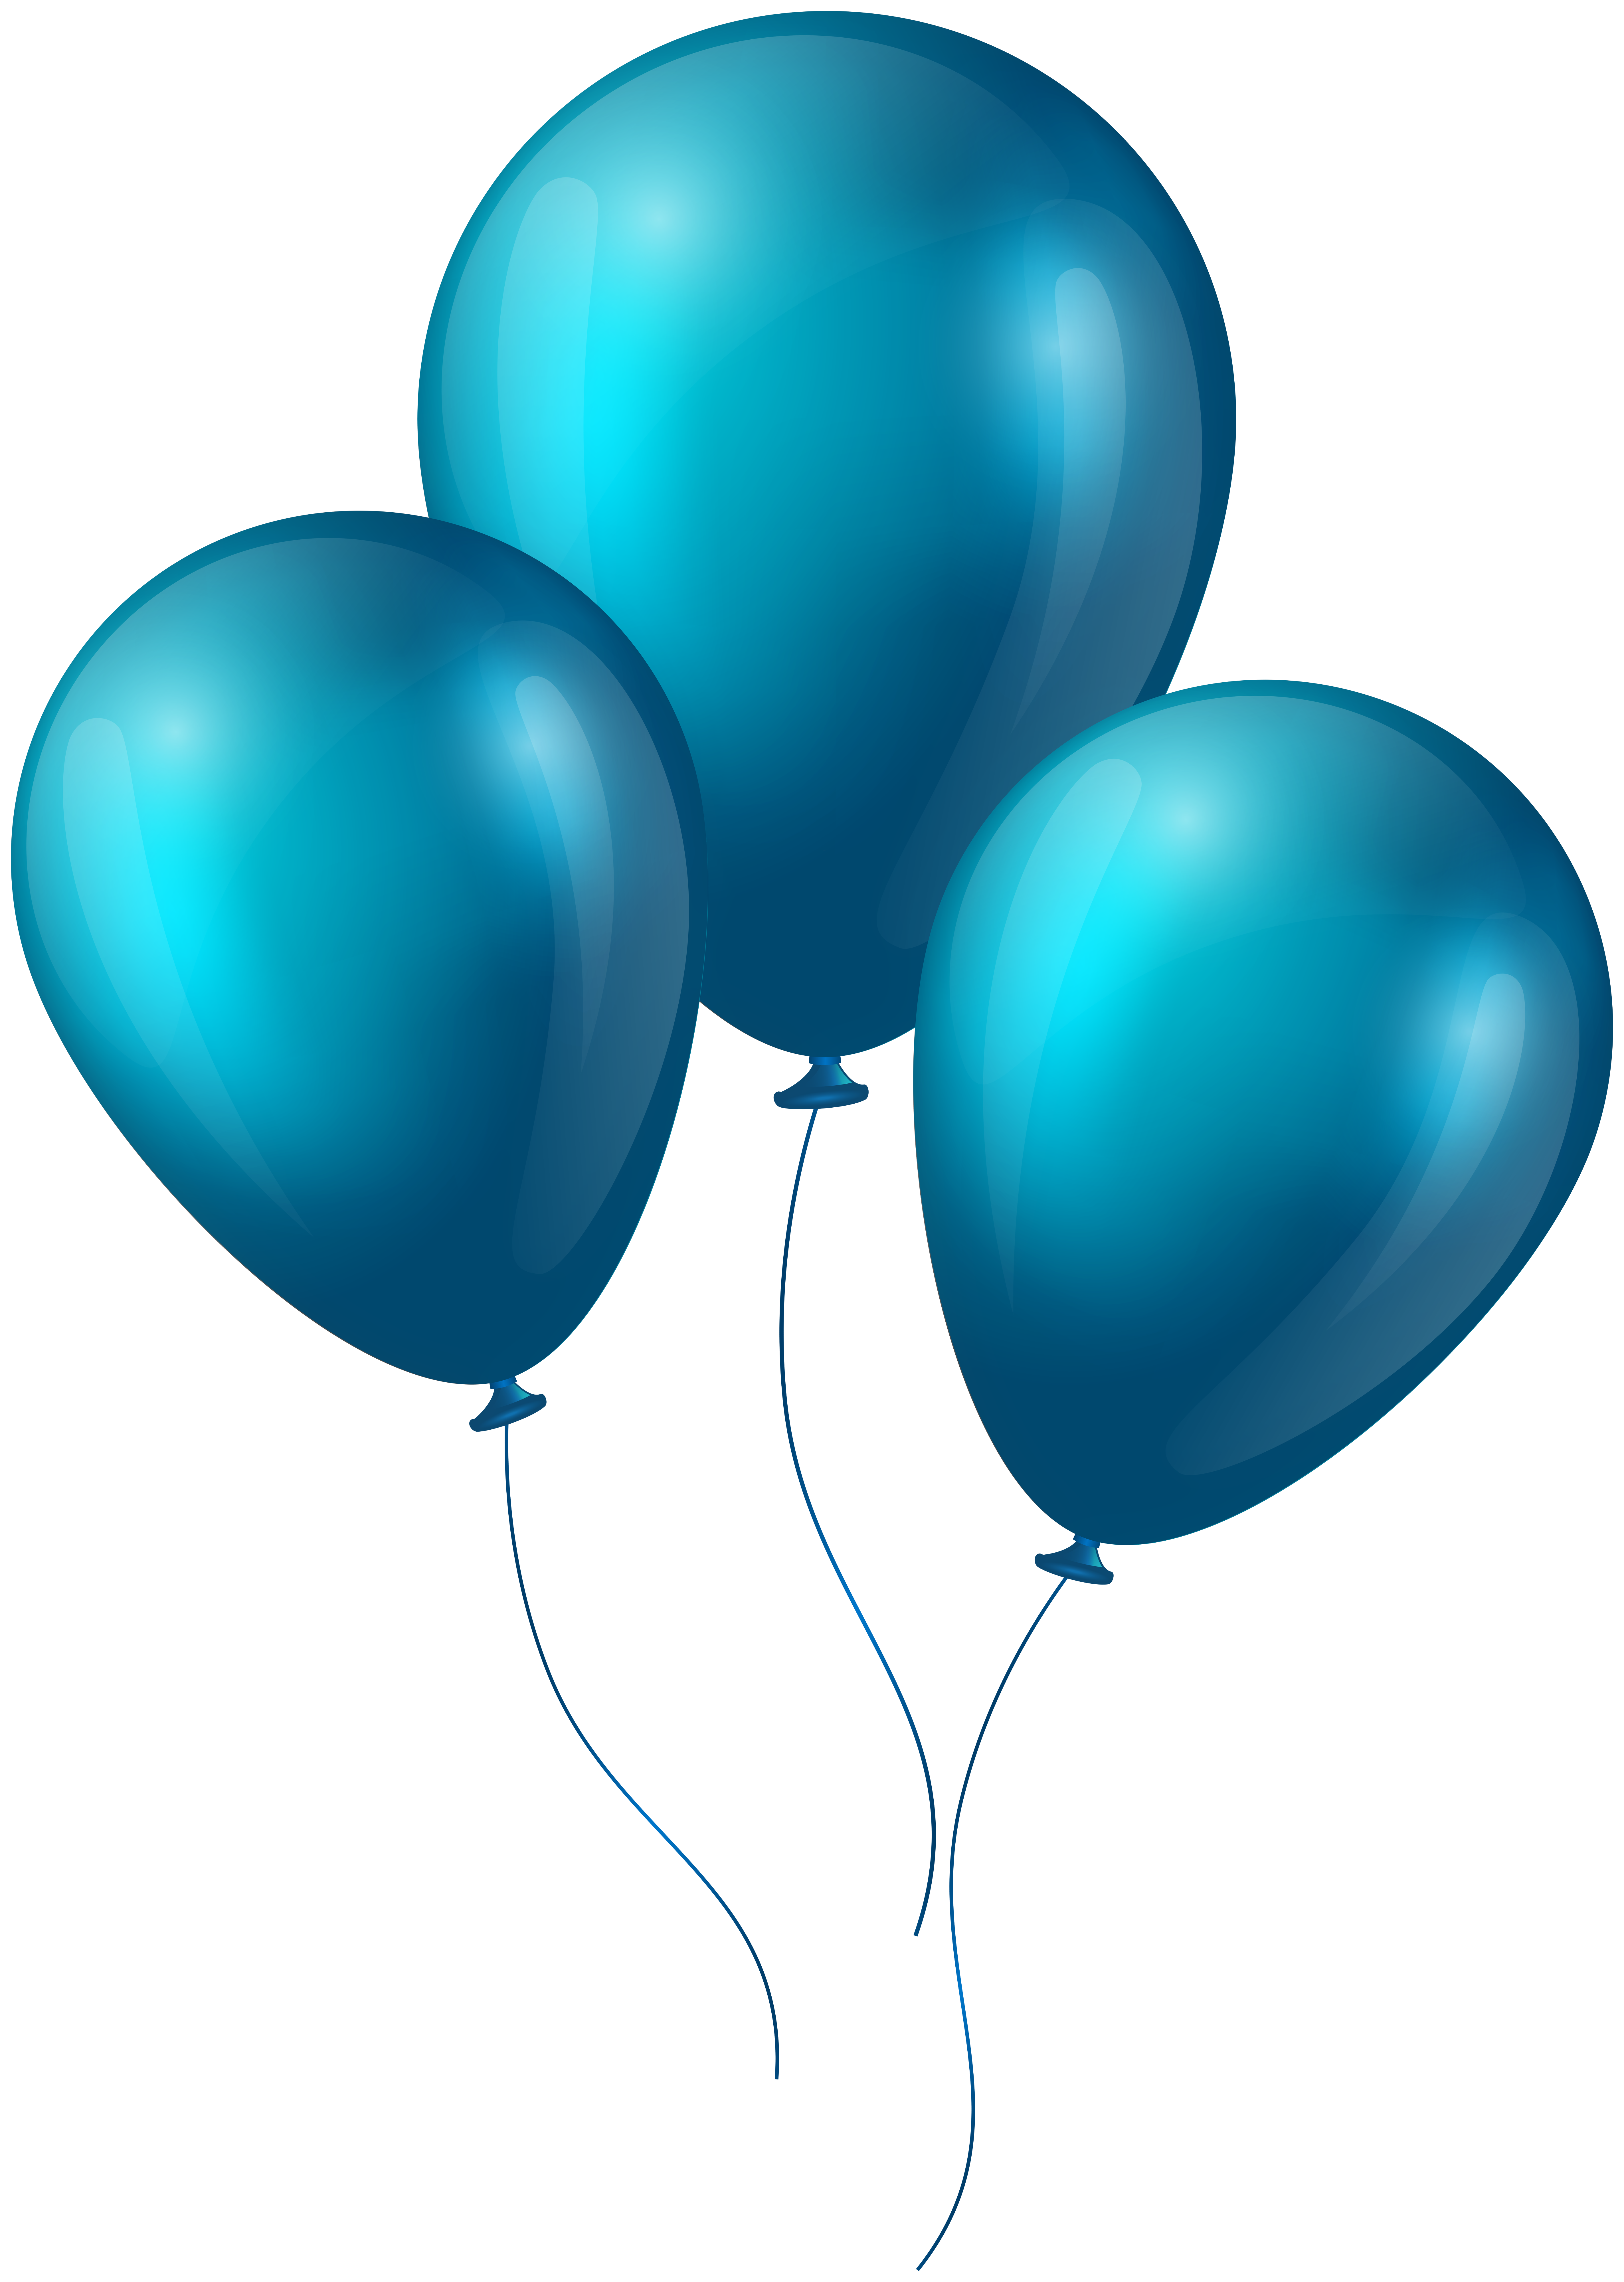 0 Result Images of Globos Azules Png Sin Fondo - PNG Image Collection